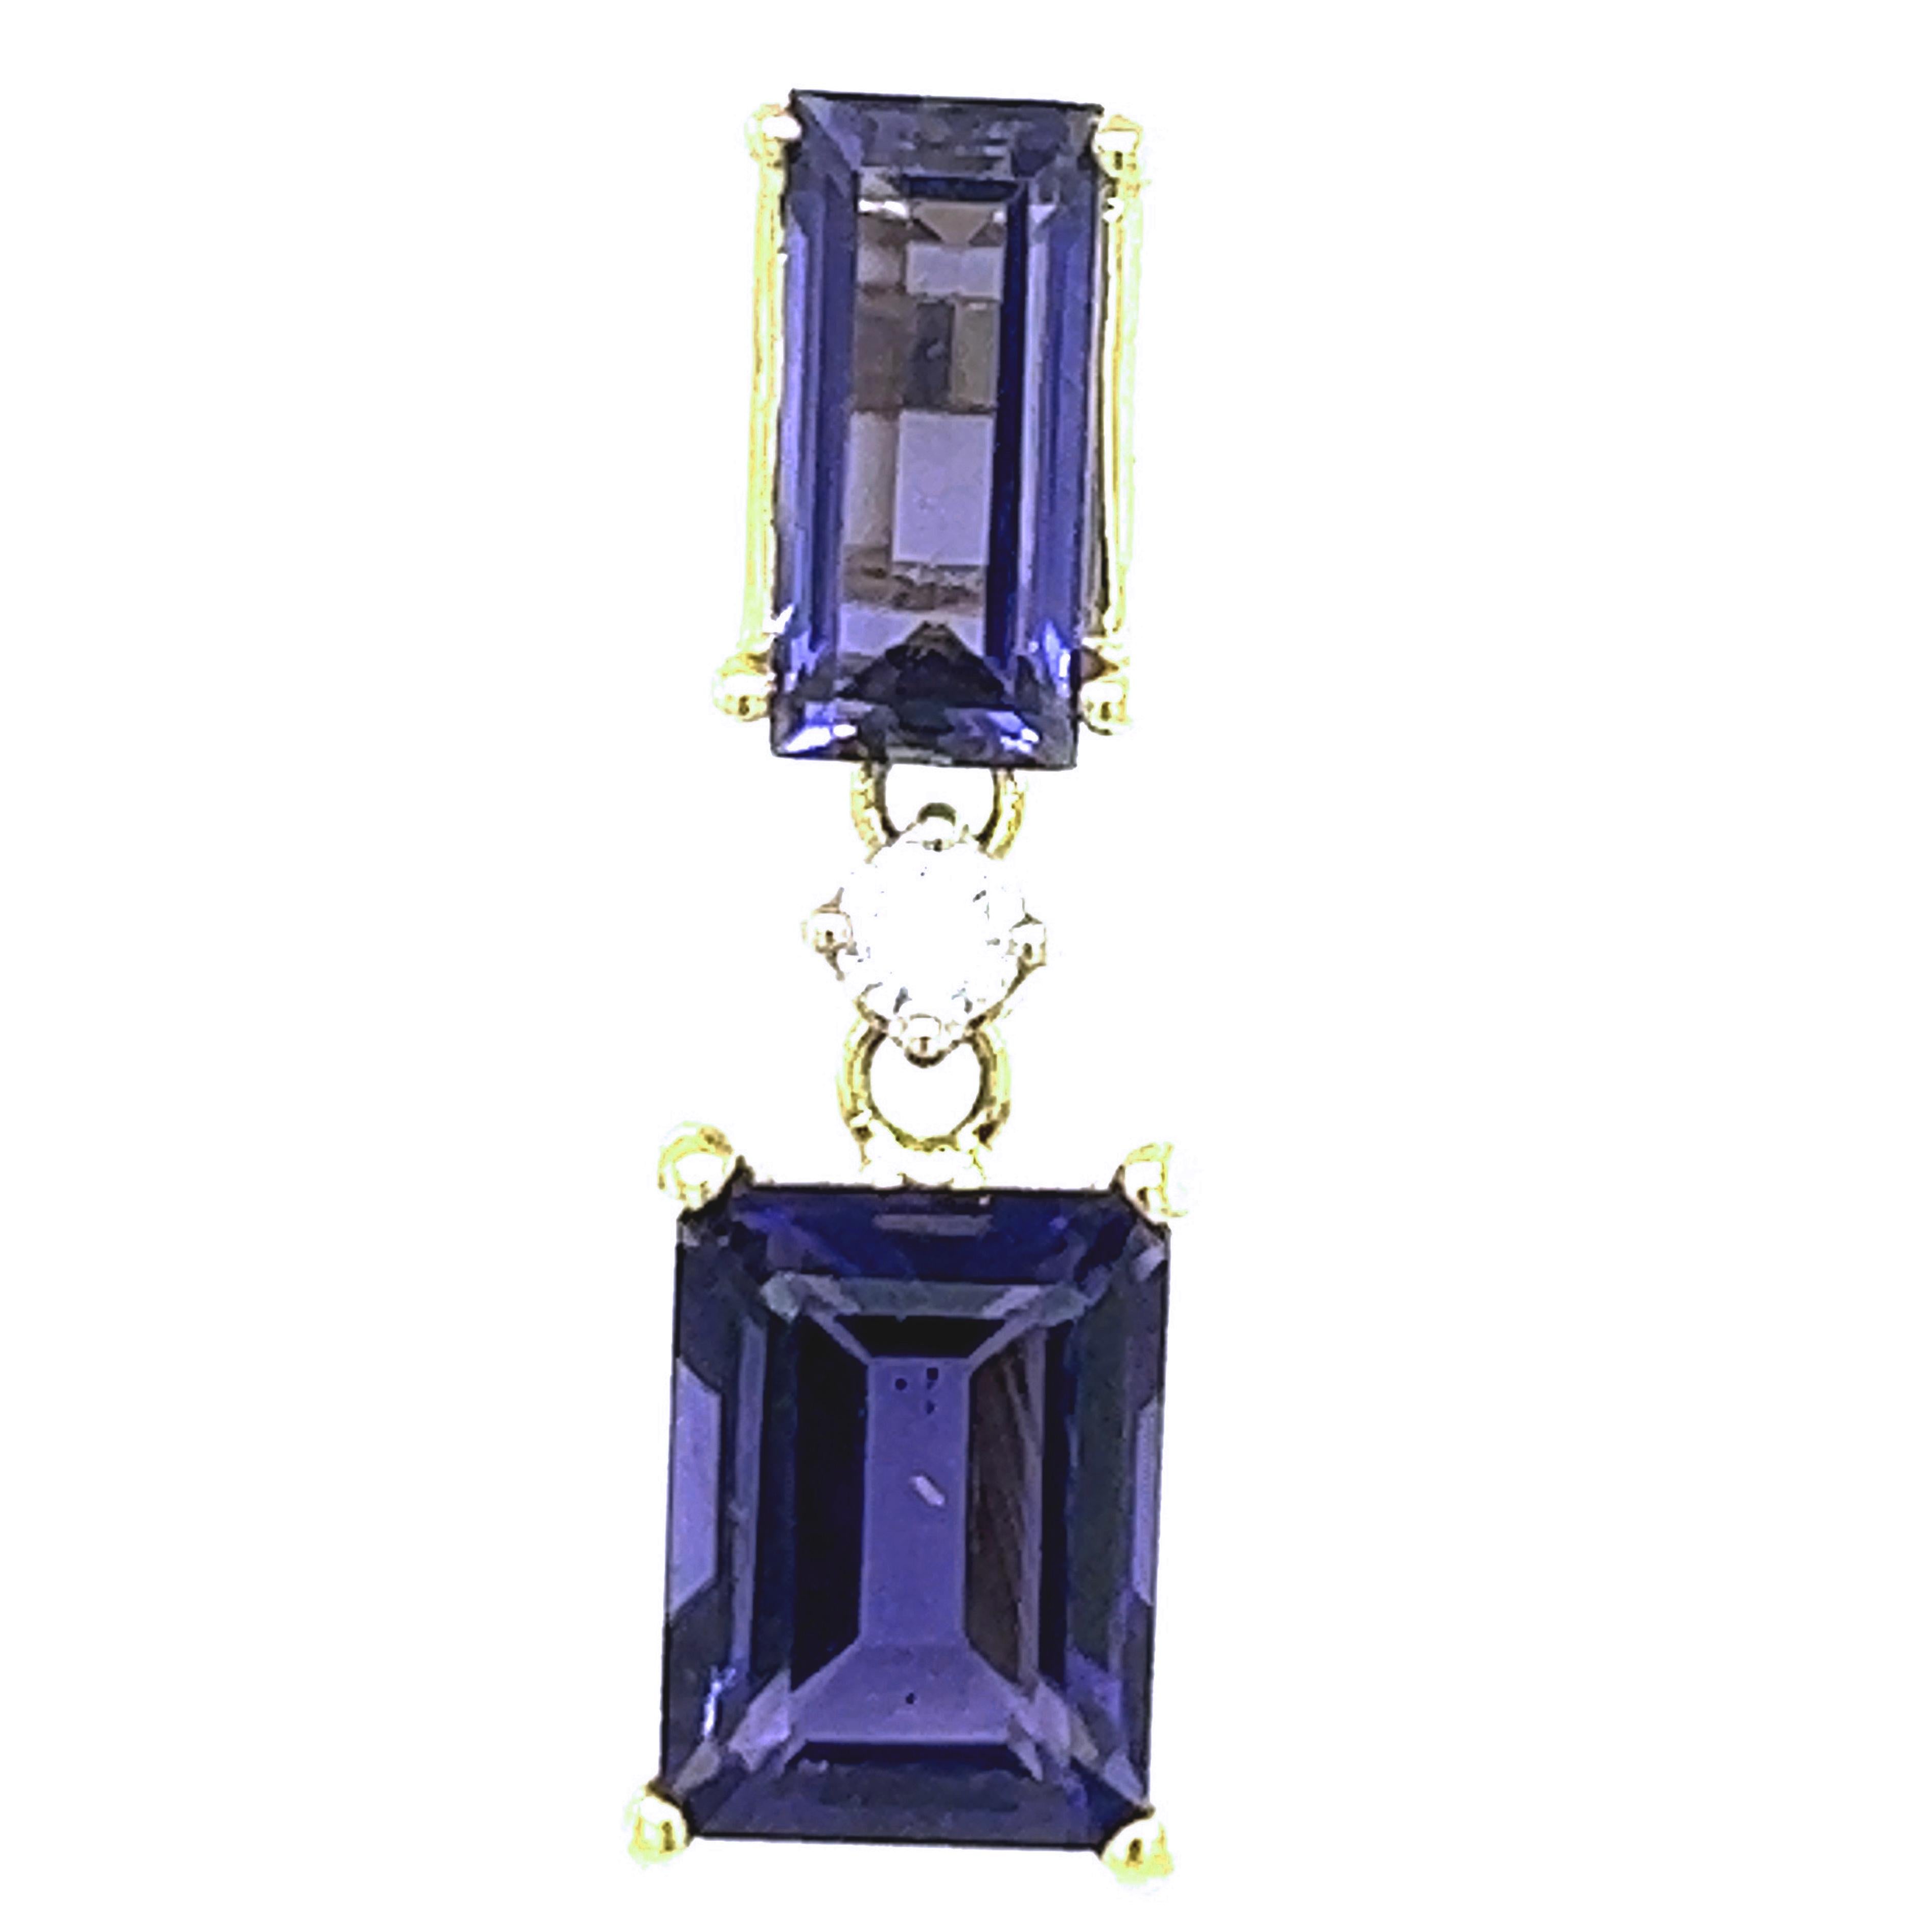 Chic yet timeless  4.26 Carat Emerald Cut Natural Iolite in a 0.10Kt  White Diamond 18KT Carat Yellow Gold Setting.
These top quality stones were carefully hand inlaid in Germany.
In our smart fitted suede leather case and pouch.
Total Lenght 0.905